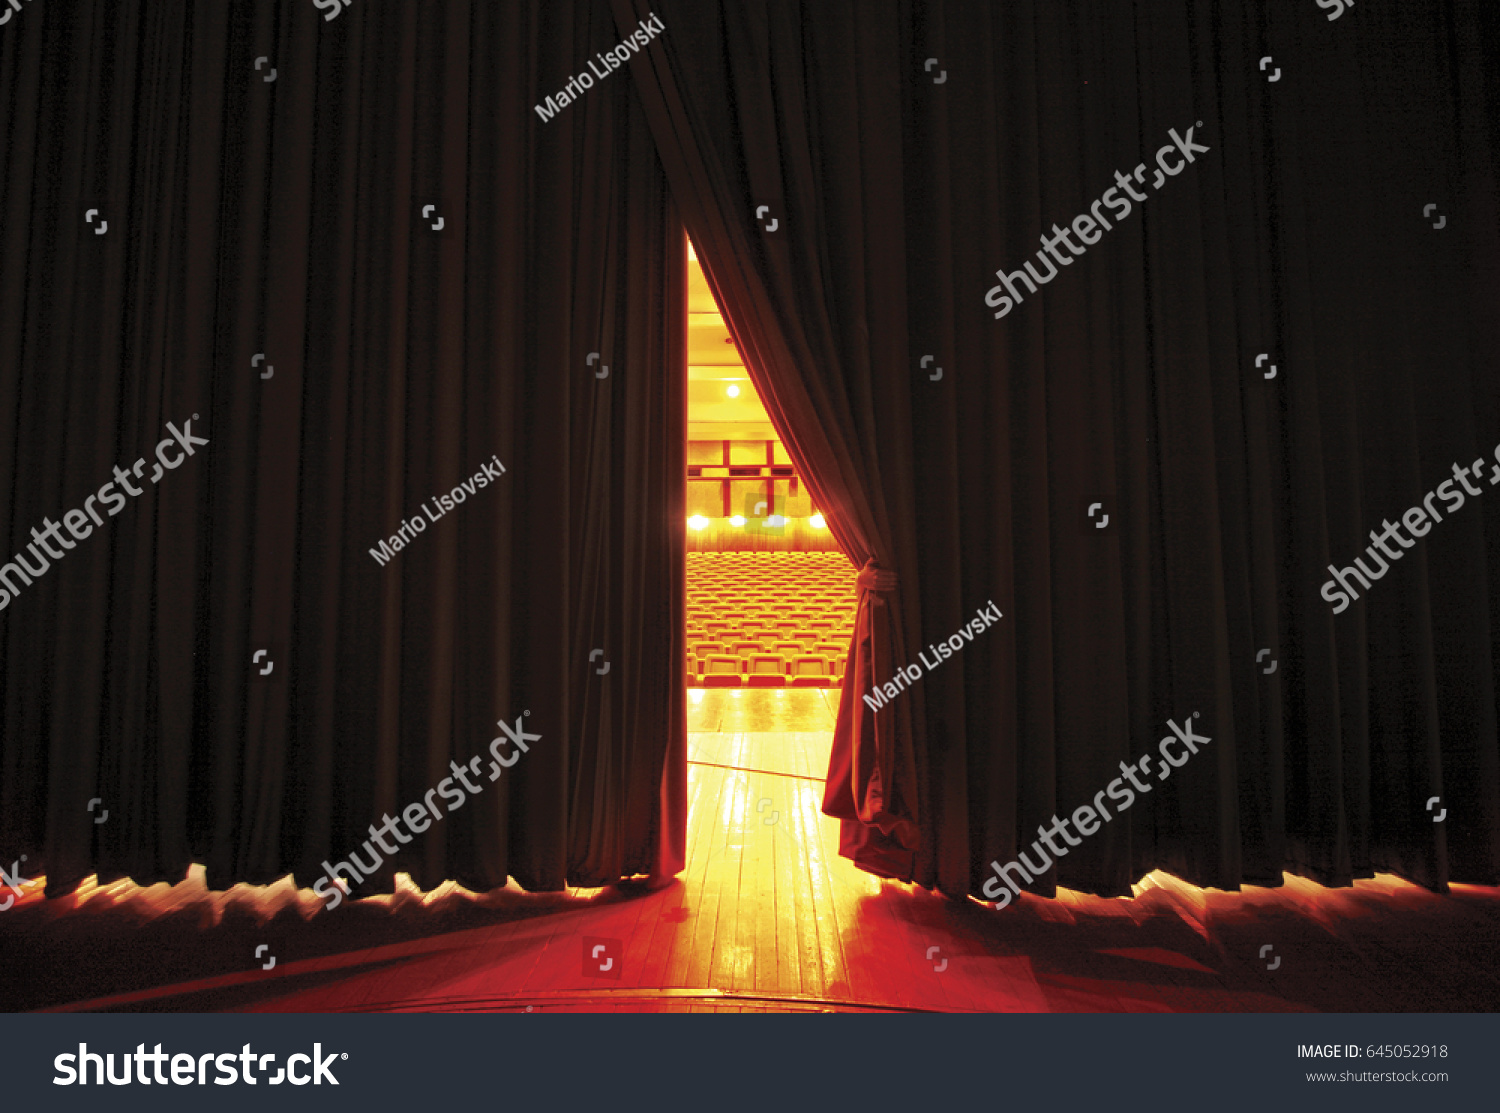 Theater seats through curtains.. behind scene #645052918